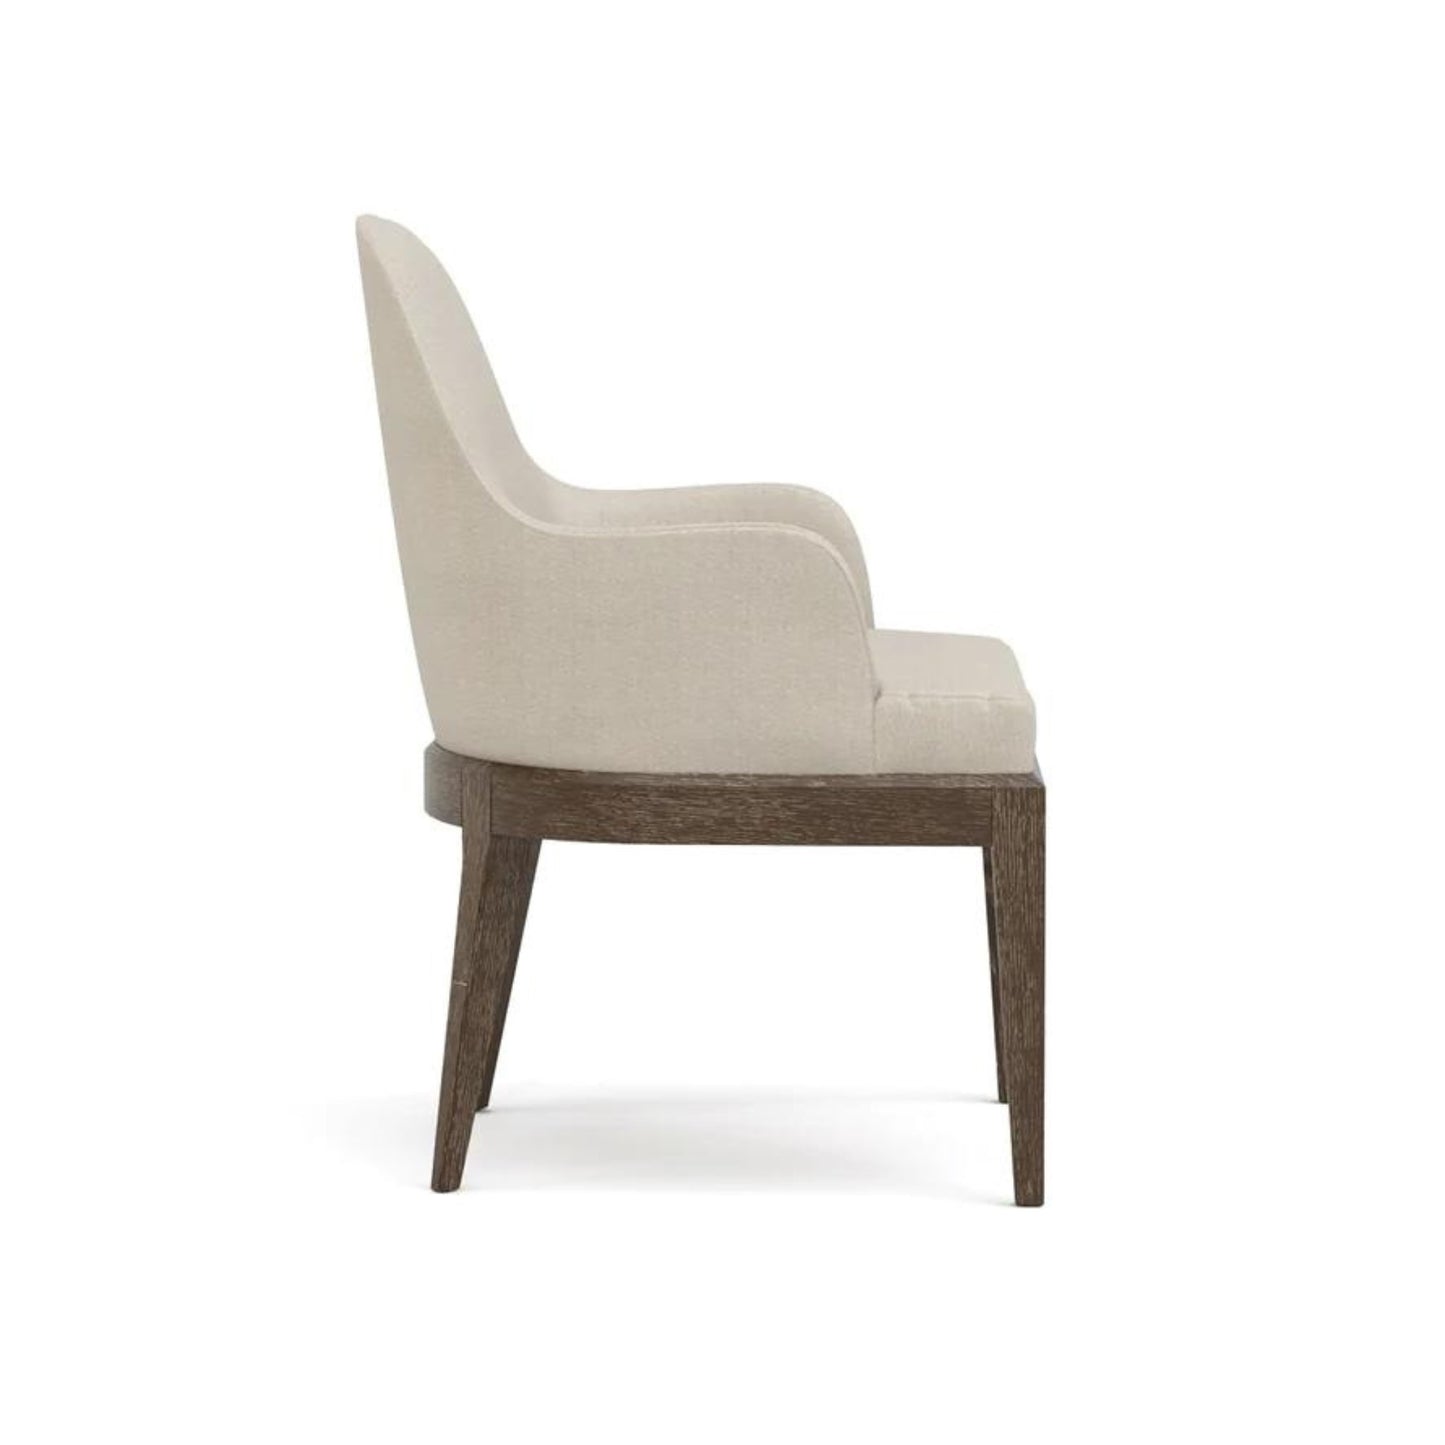 Maidstone Upholstered Arm Chair